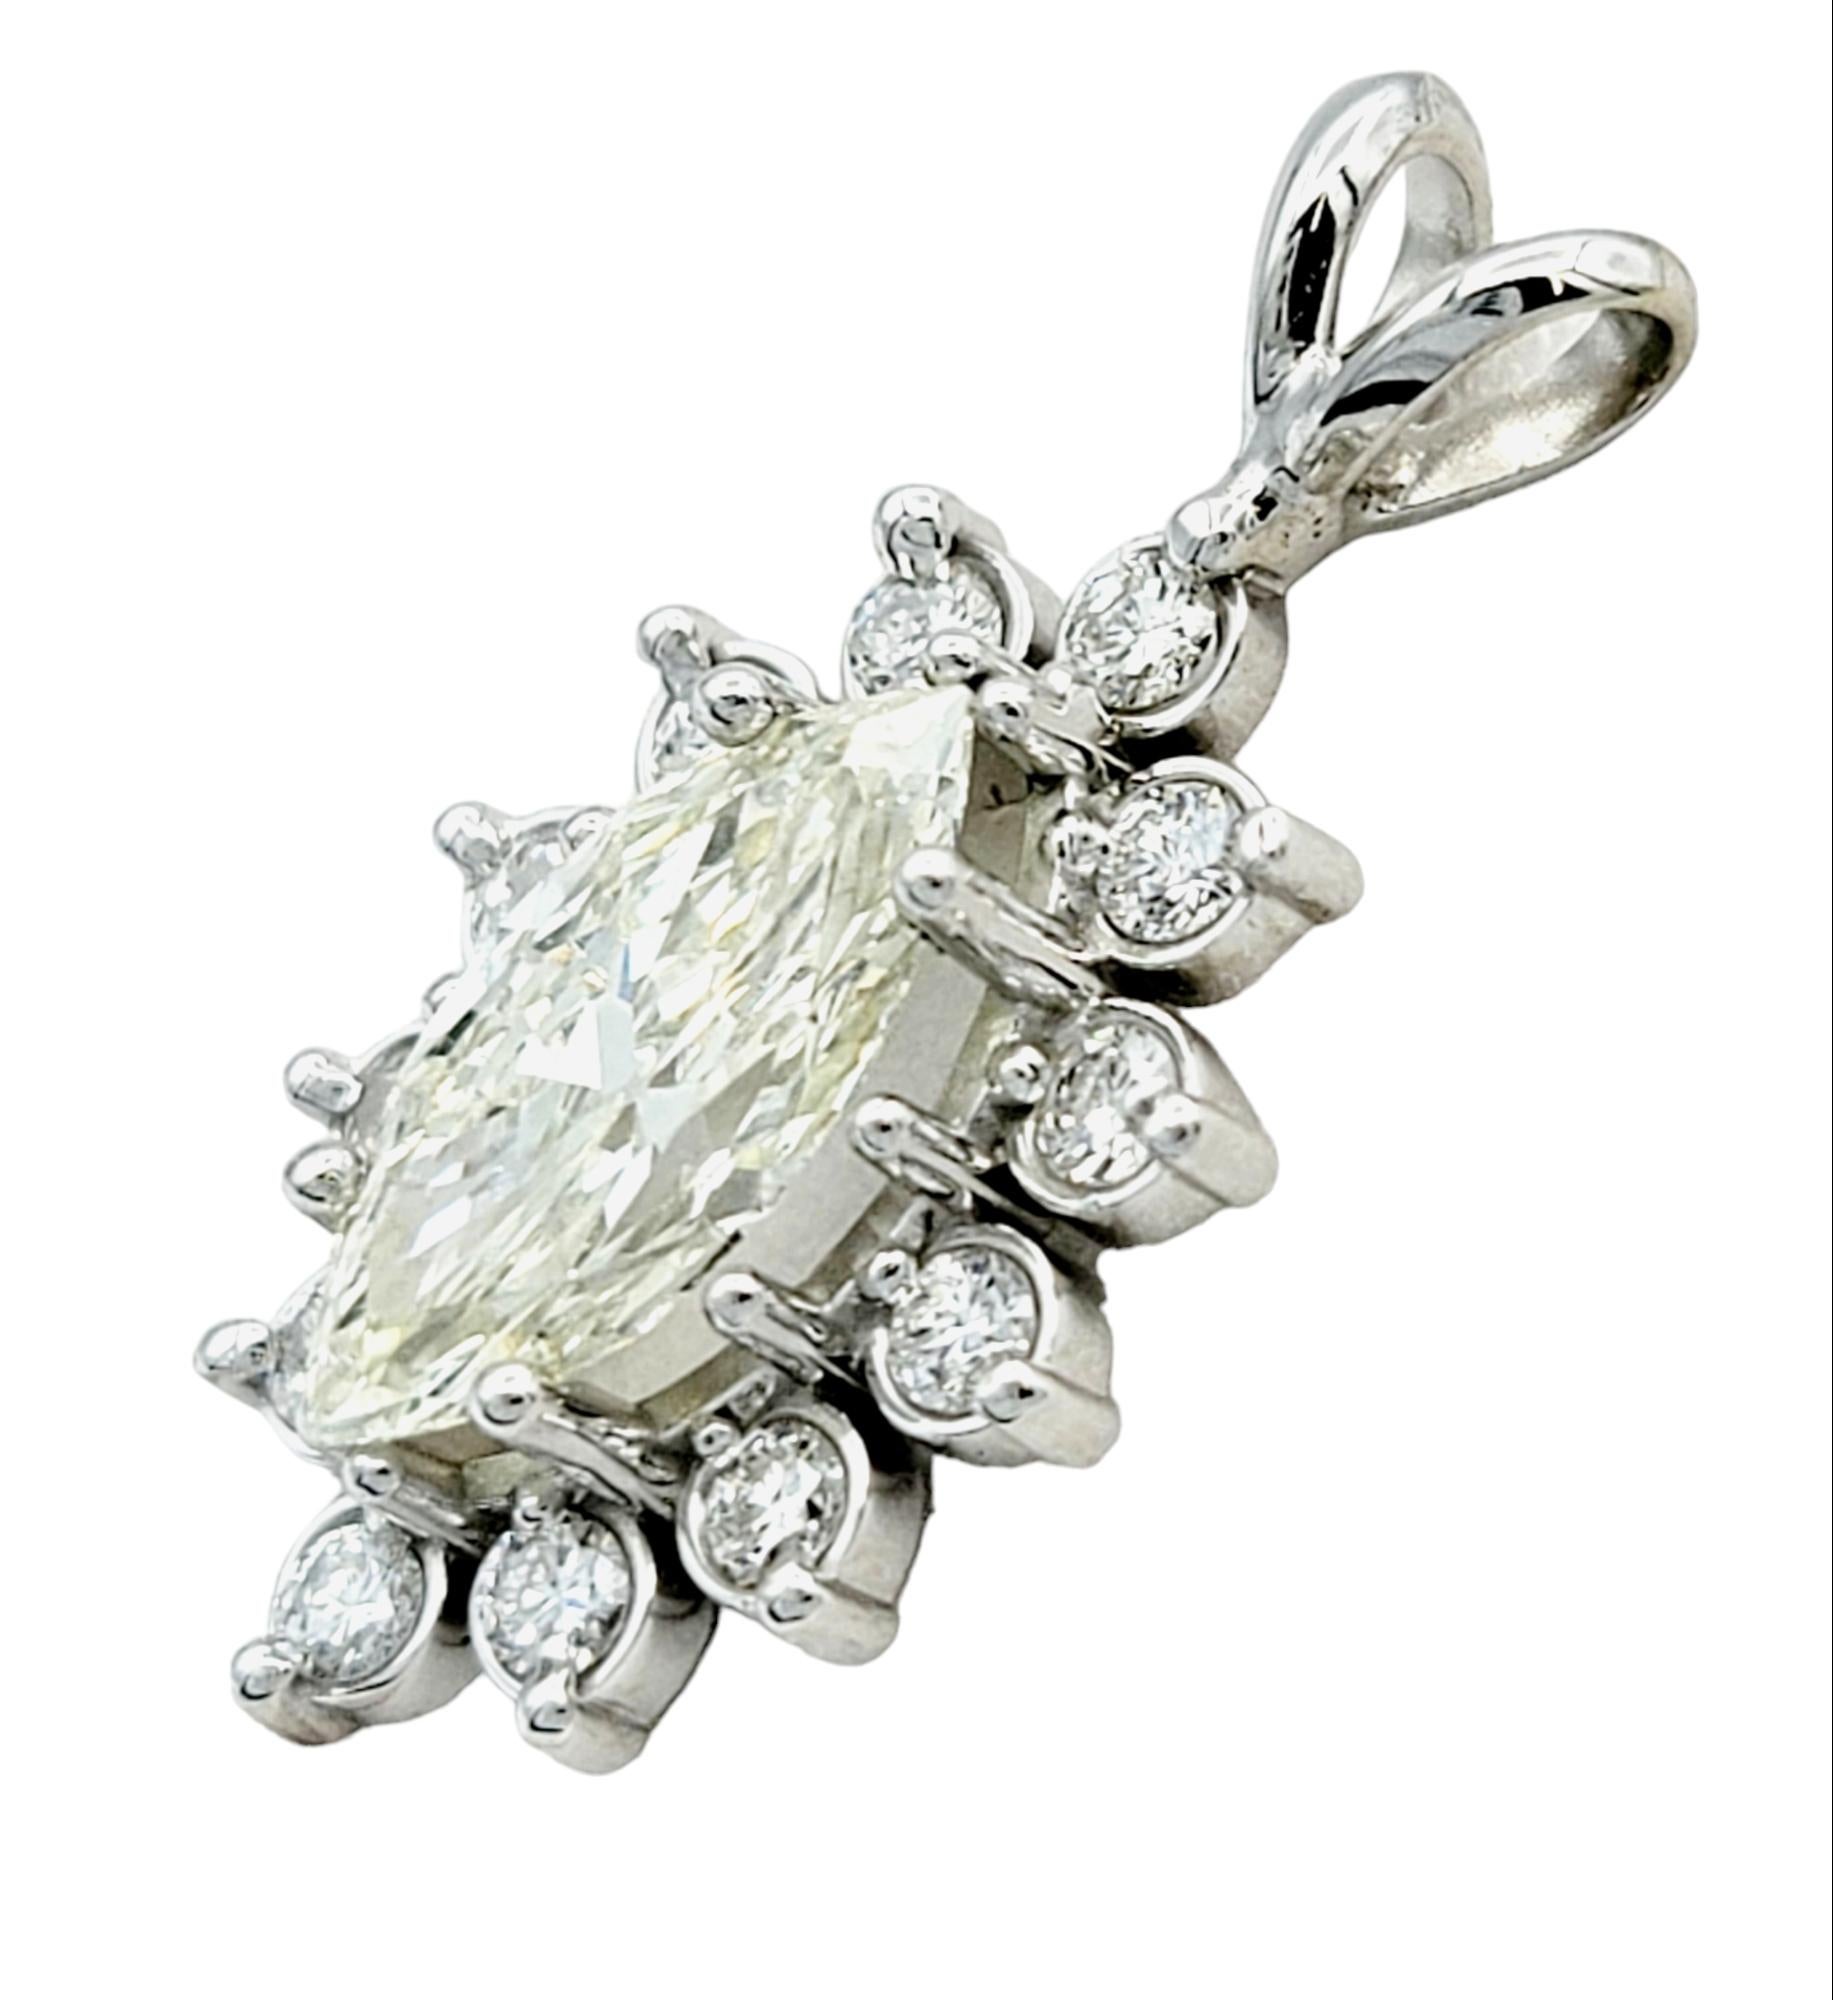 Adorn yourself with sheer elegance through this 14 karat white gold pendant, a captivating piece that radiates timeless sophistication. The pendant's centerpiece boasts a resplendent marquise-cut diamond, its elongated silhouette adding a touch of